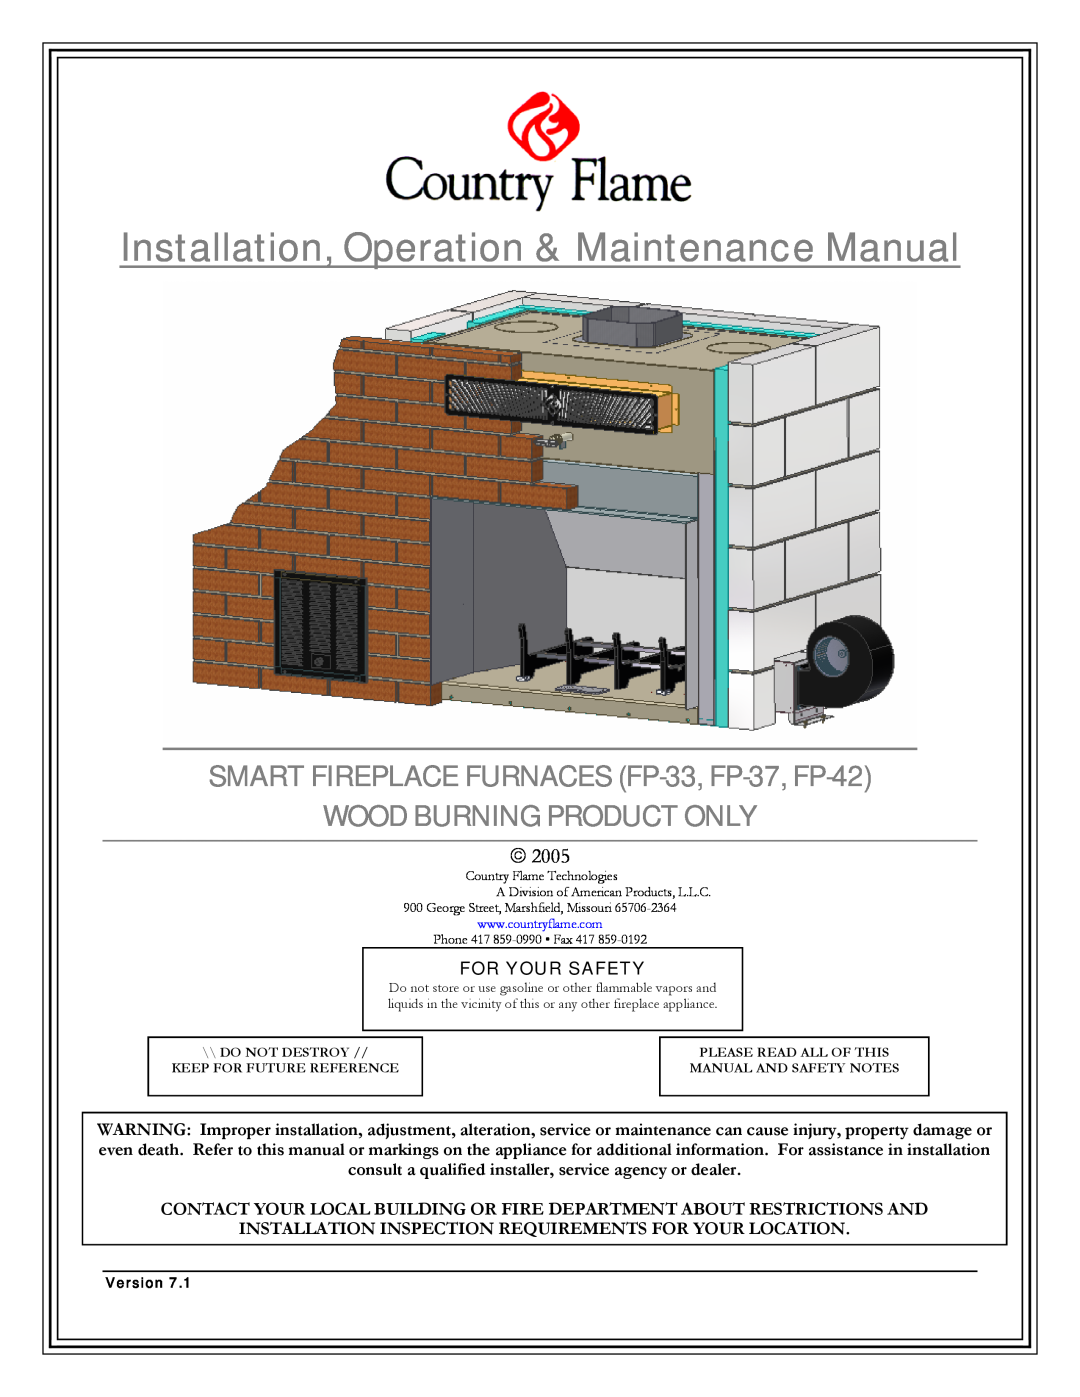 Country Flame Fireplace FP33, FP42, FP37 SMARTFIREPLACEFURNACESFP-33,FP-37,FP-42, Woodburningproductonly, For Your Safety 